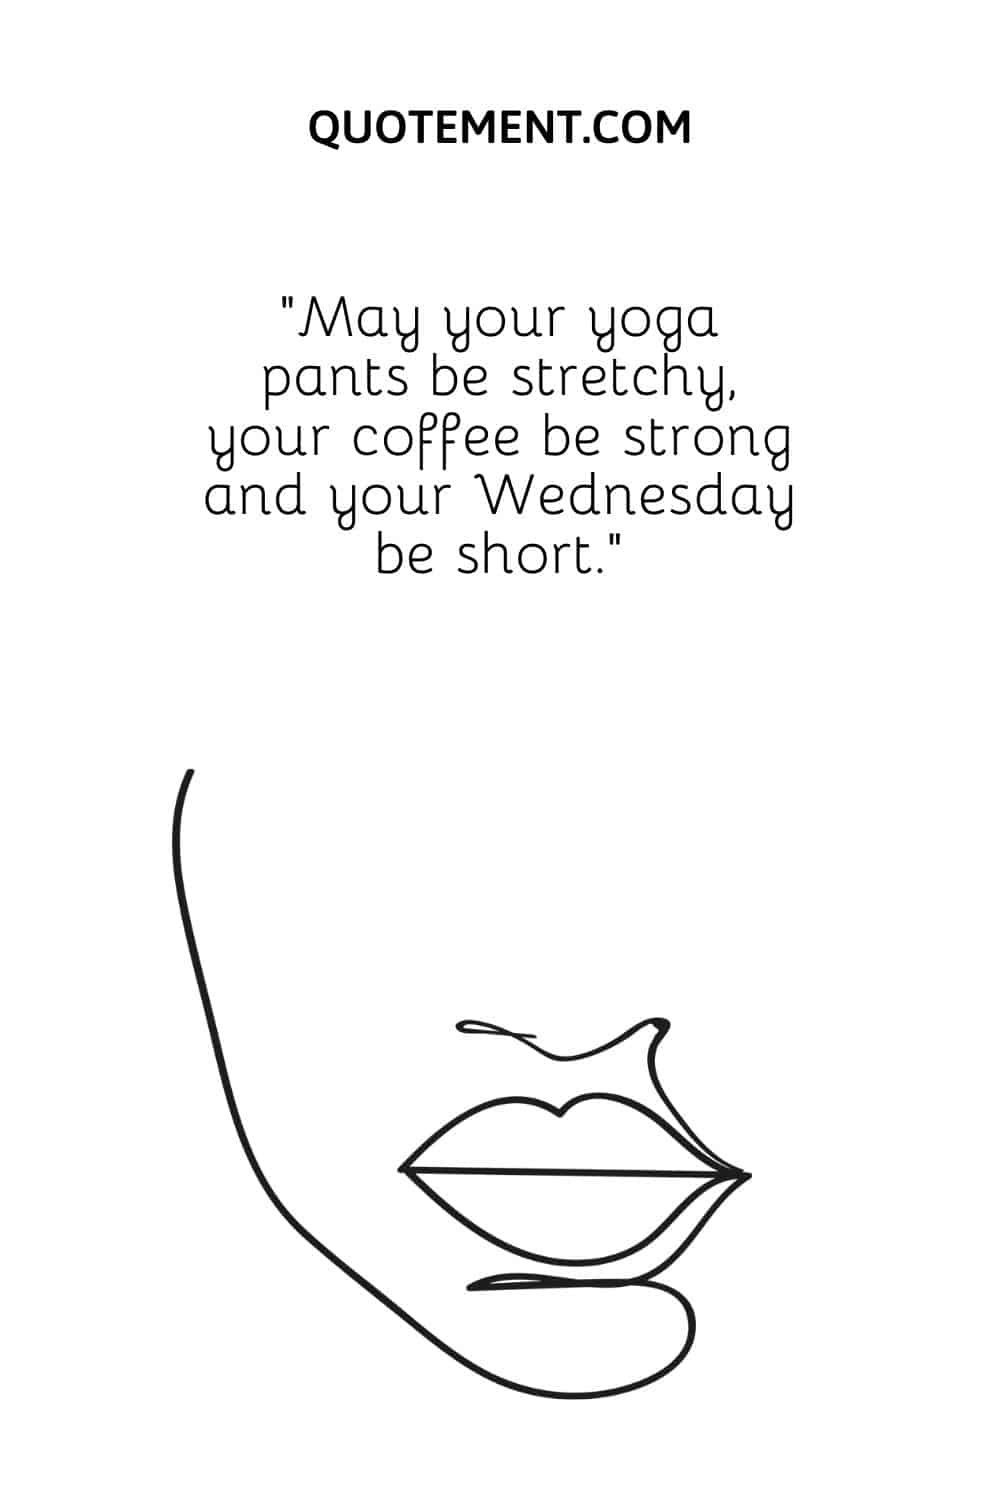 May your yoga pants be stretchy, your coffee be strong and your Wednesday be short